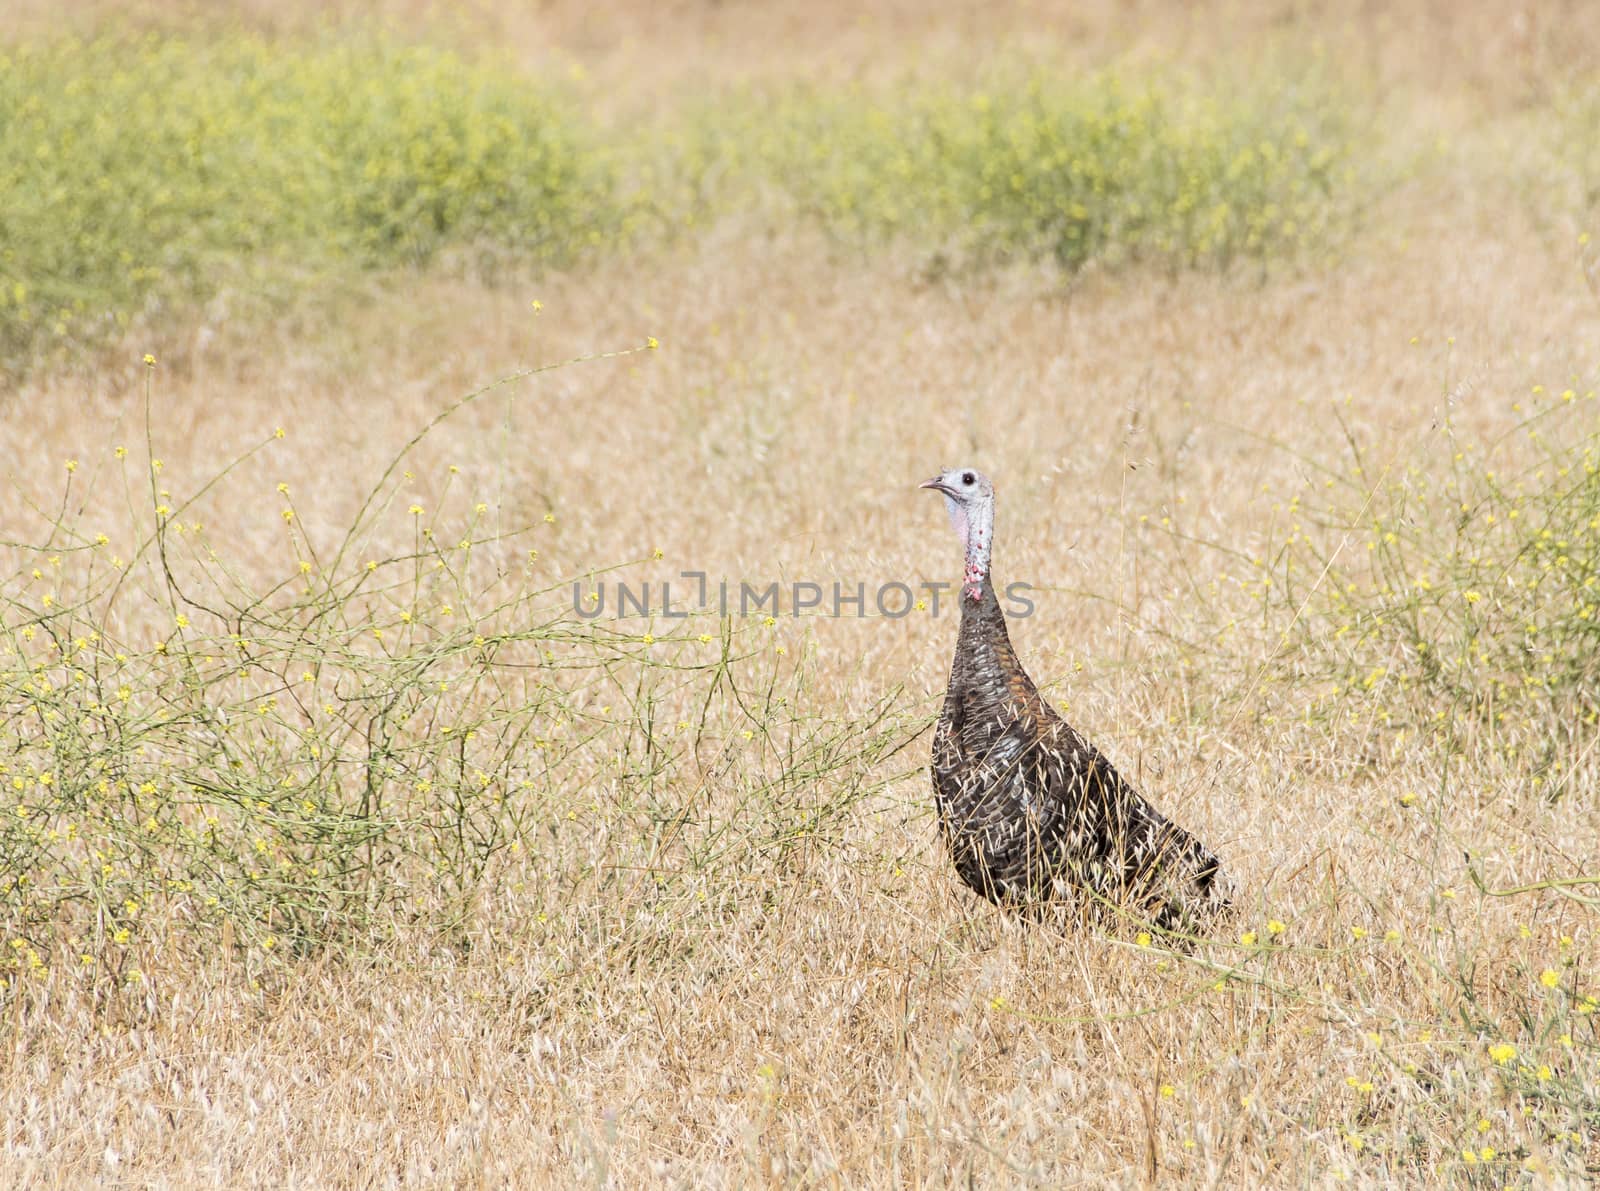 Wild Turkey female standing in the field with dry grass.